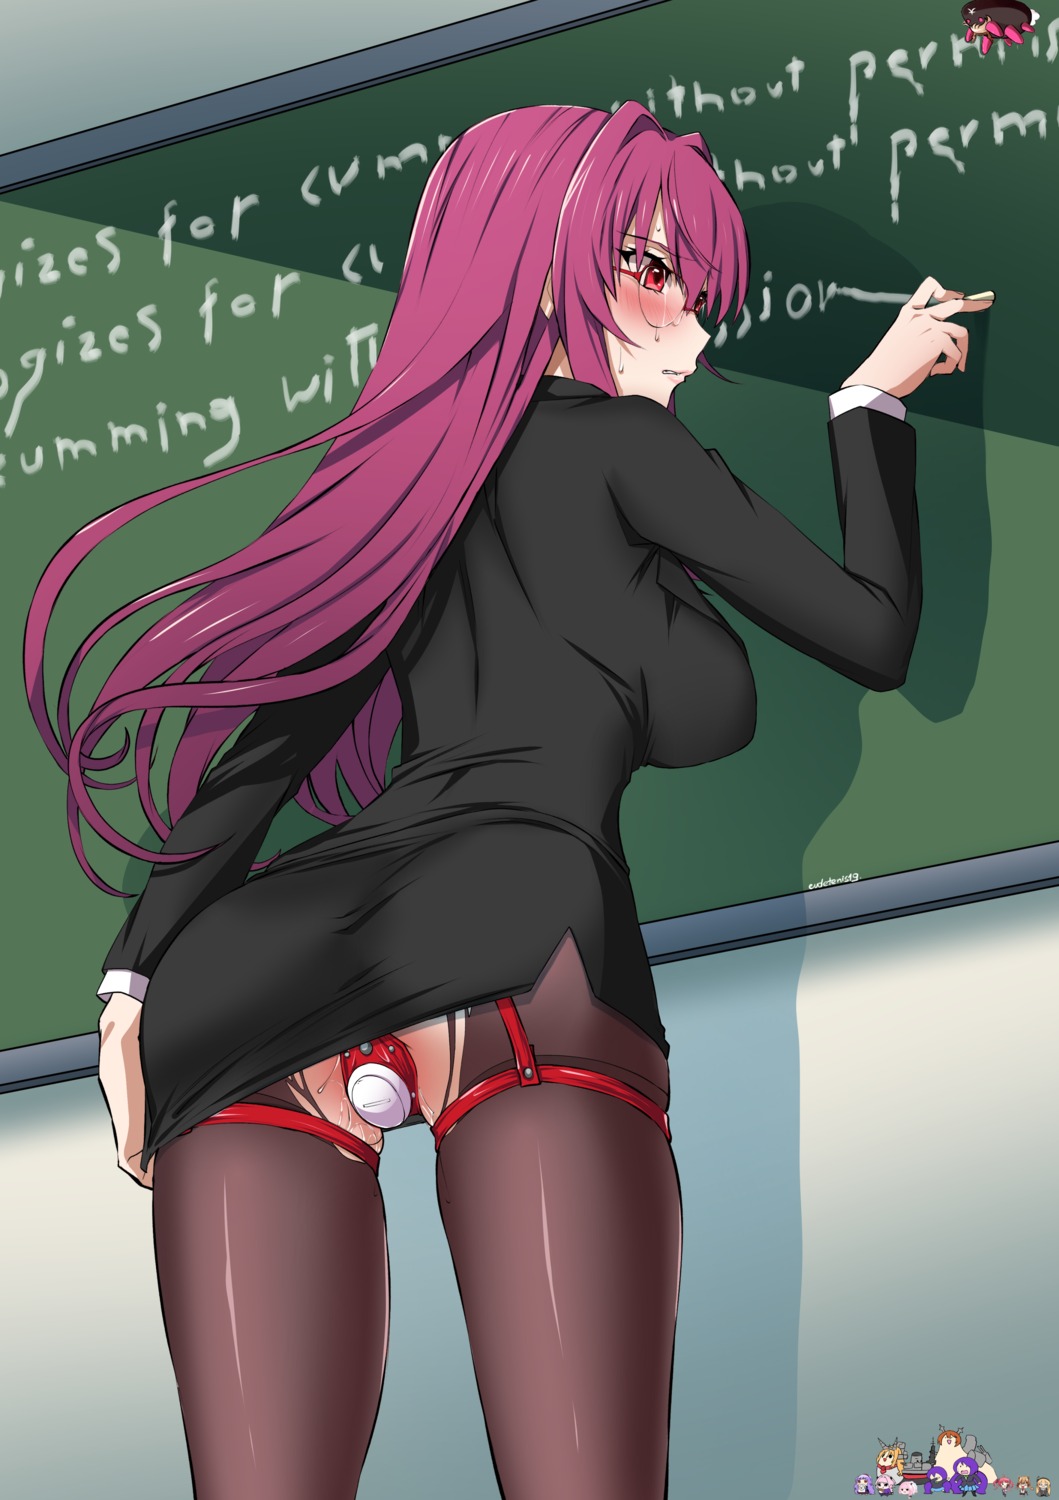 ass business_suit eudetenis fate/grand_order megane pantsu pantyhose pussy_juice scathach_(fate/grand_order) skirt_lift torn_clothes vibrator